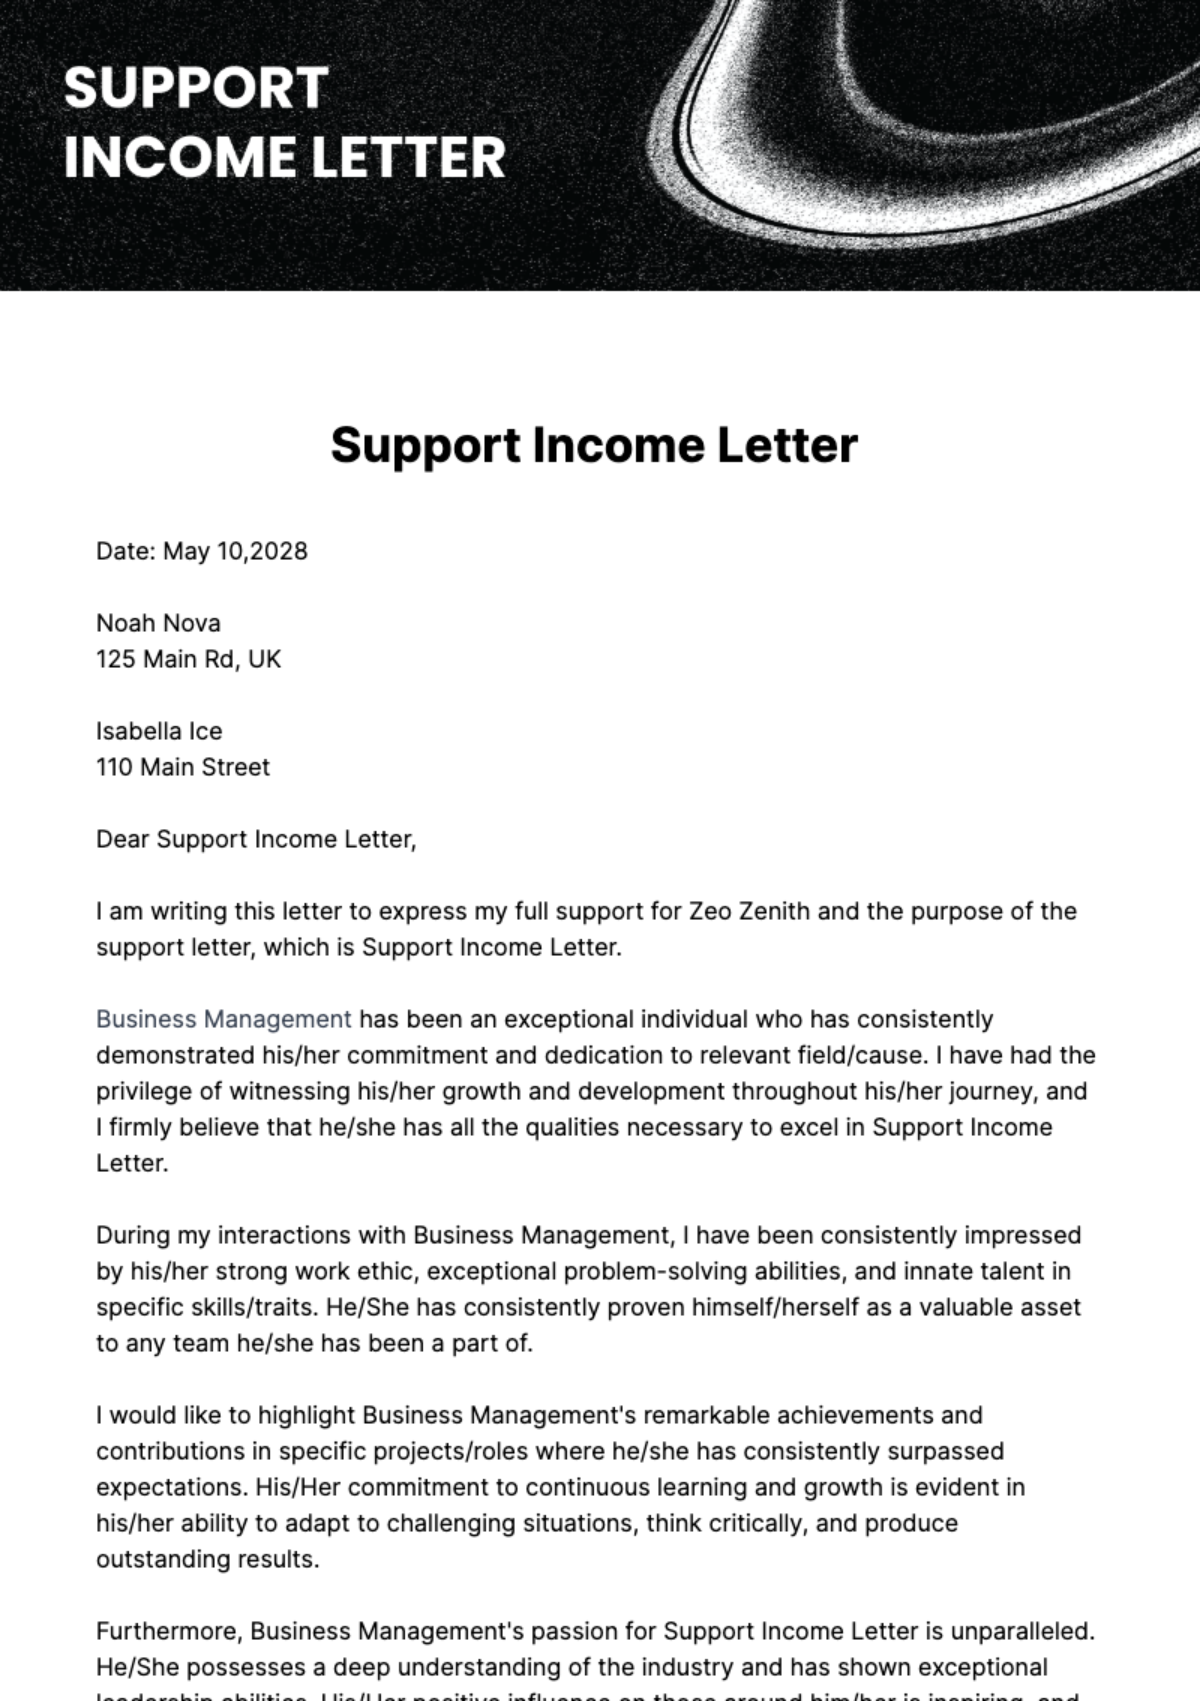 Free Support Income Letter Template